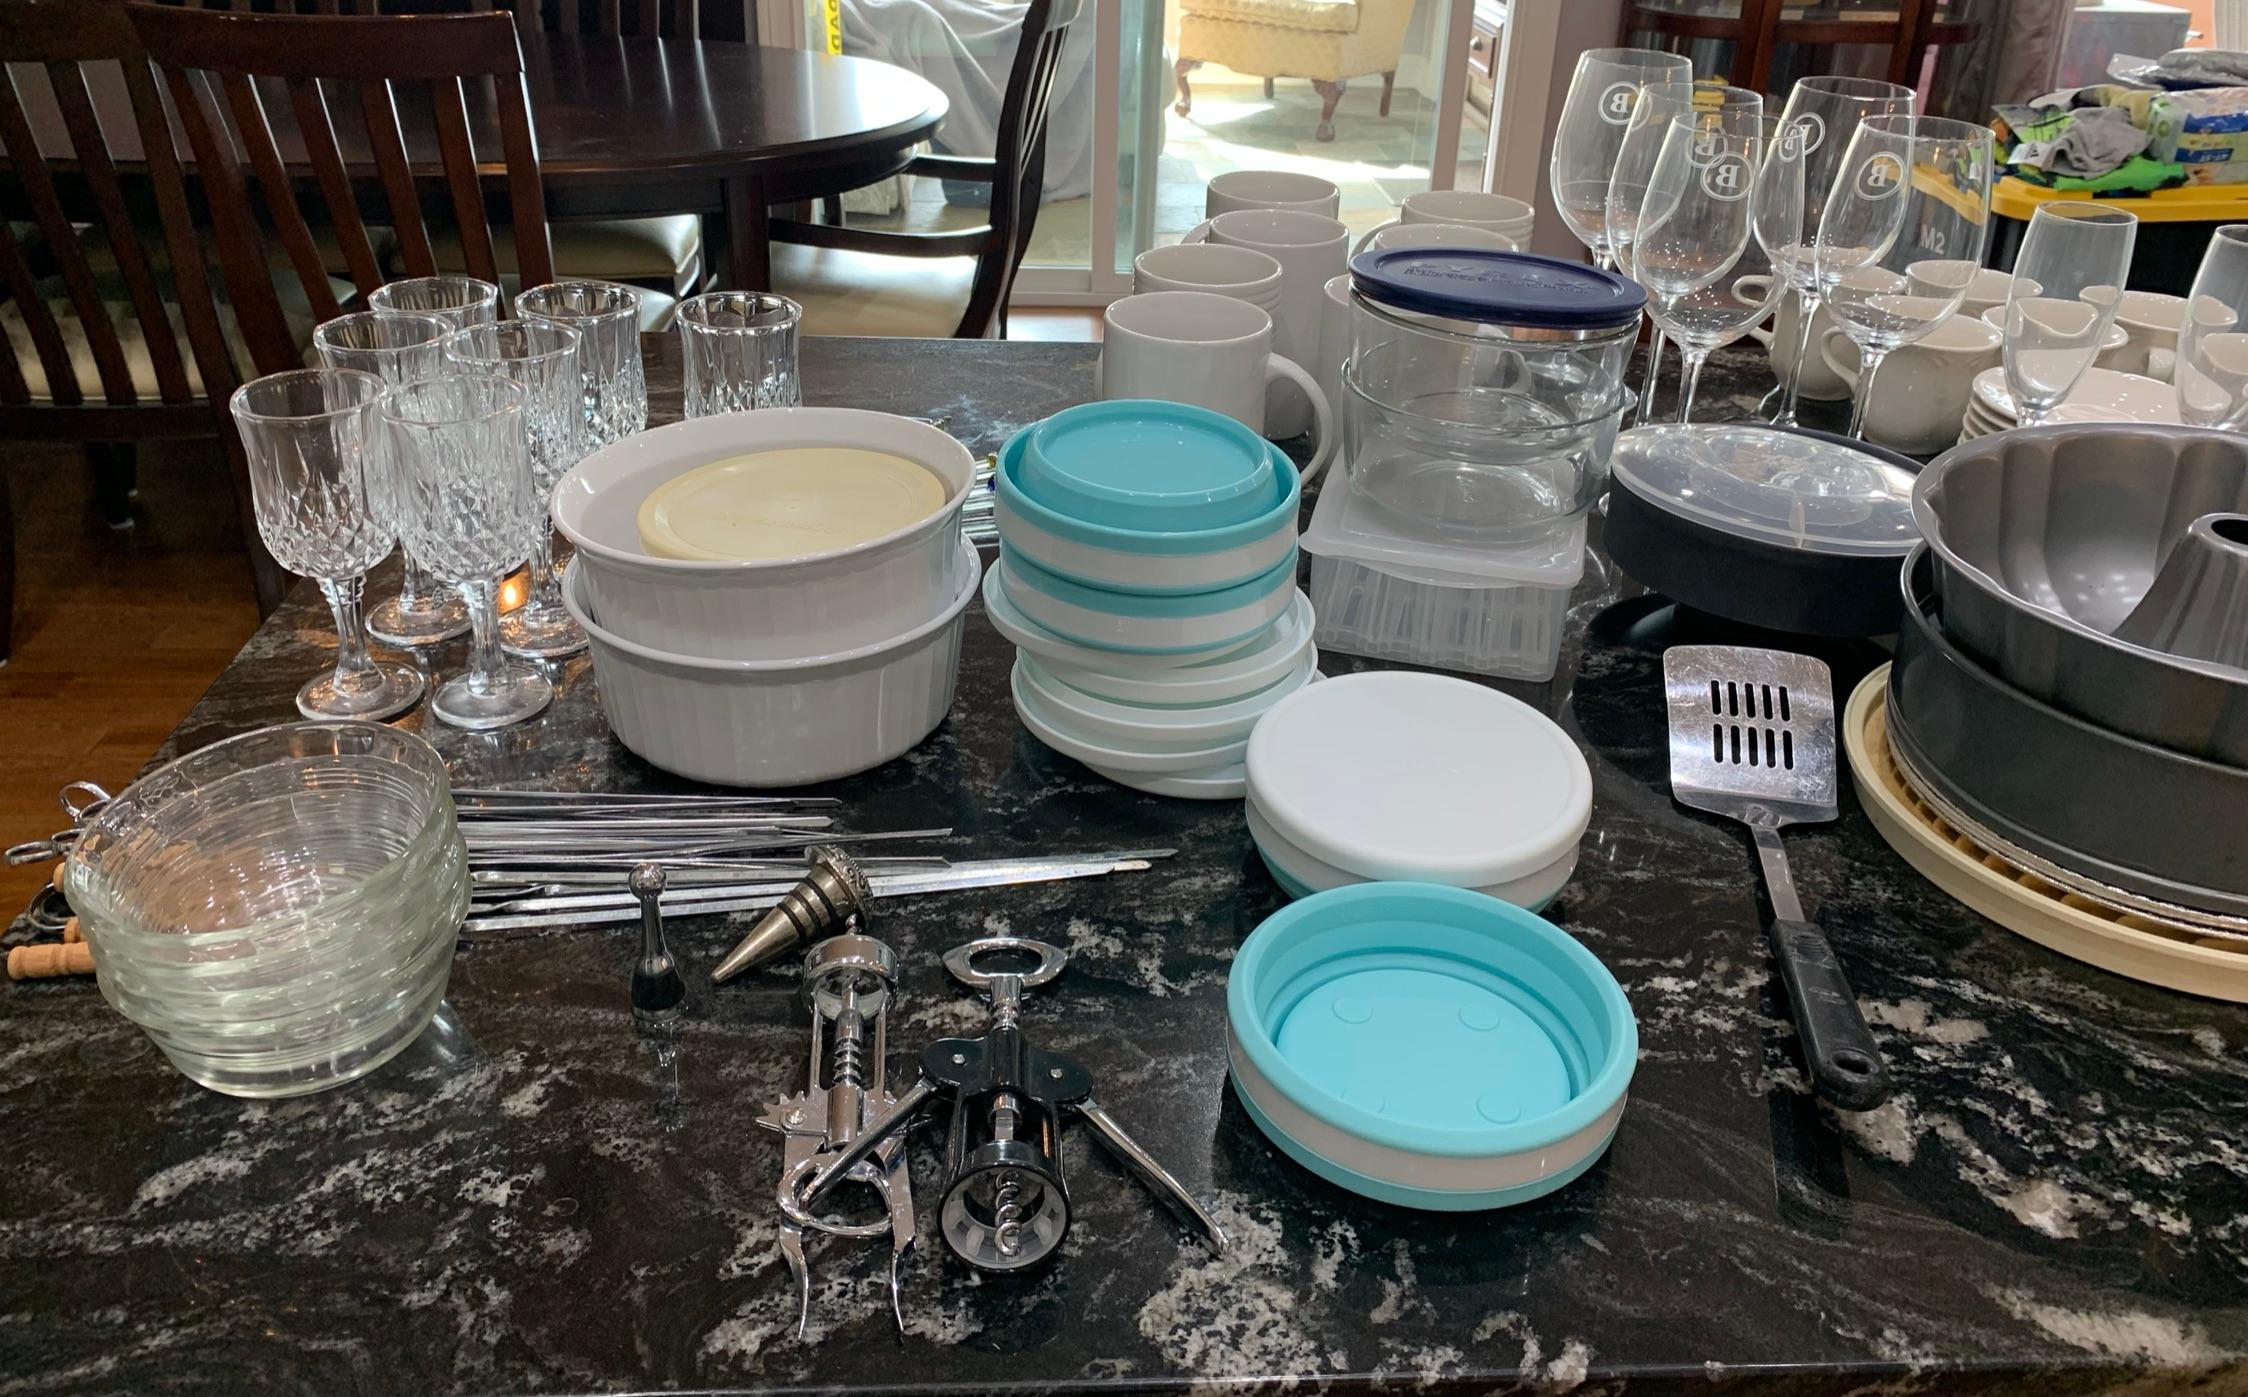 Great Group of Kitchen Items, Containers, Baking Items, Stemware, Glassware, Drink Stirrers, Mugs, &